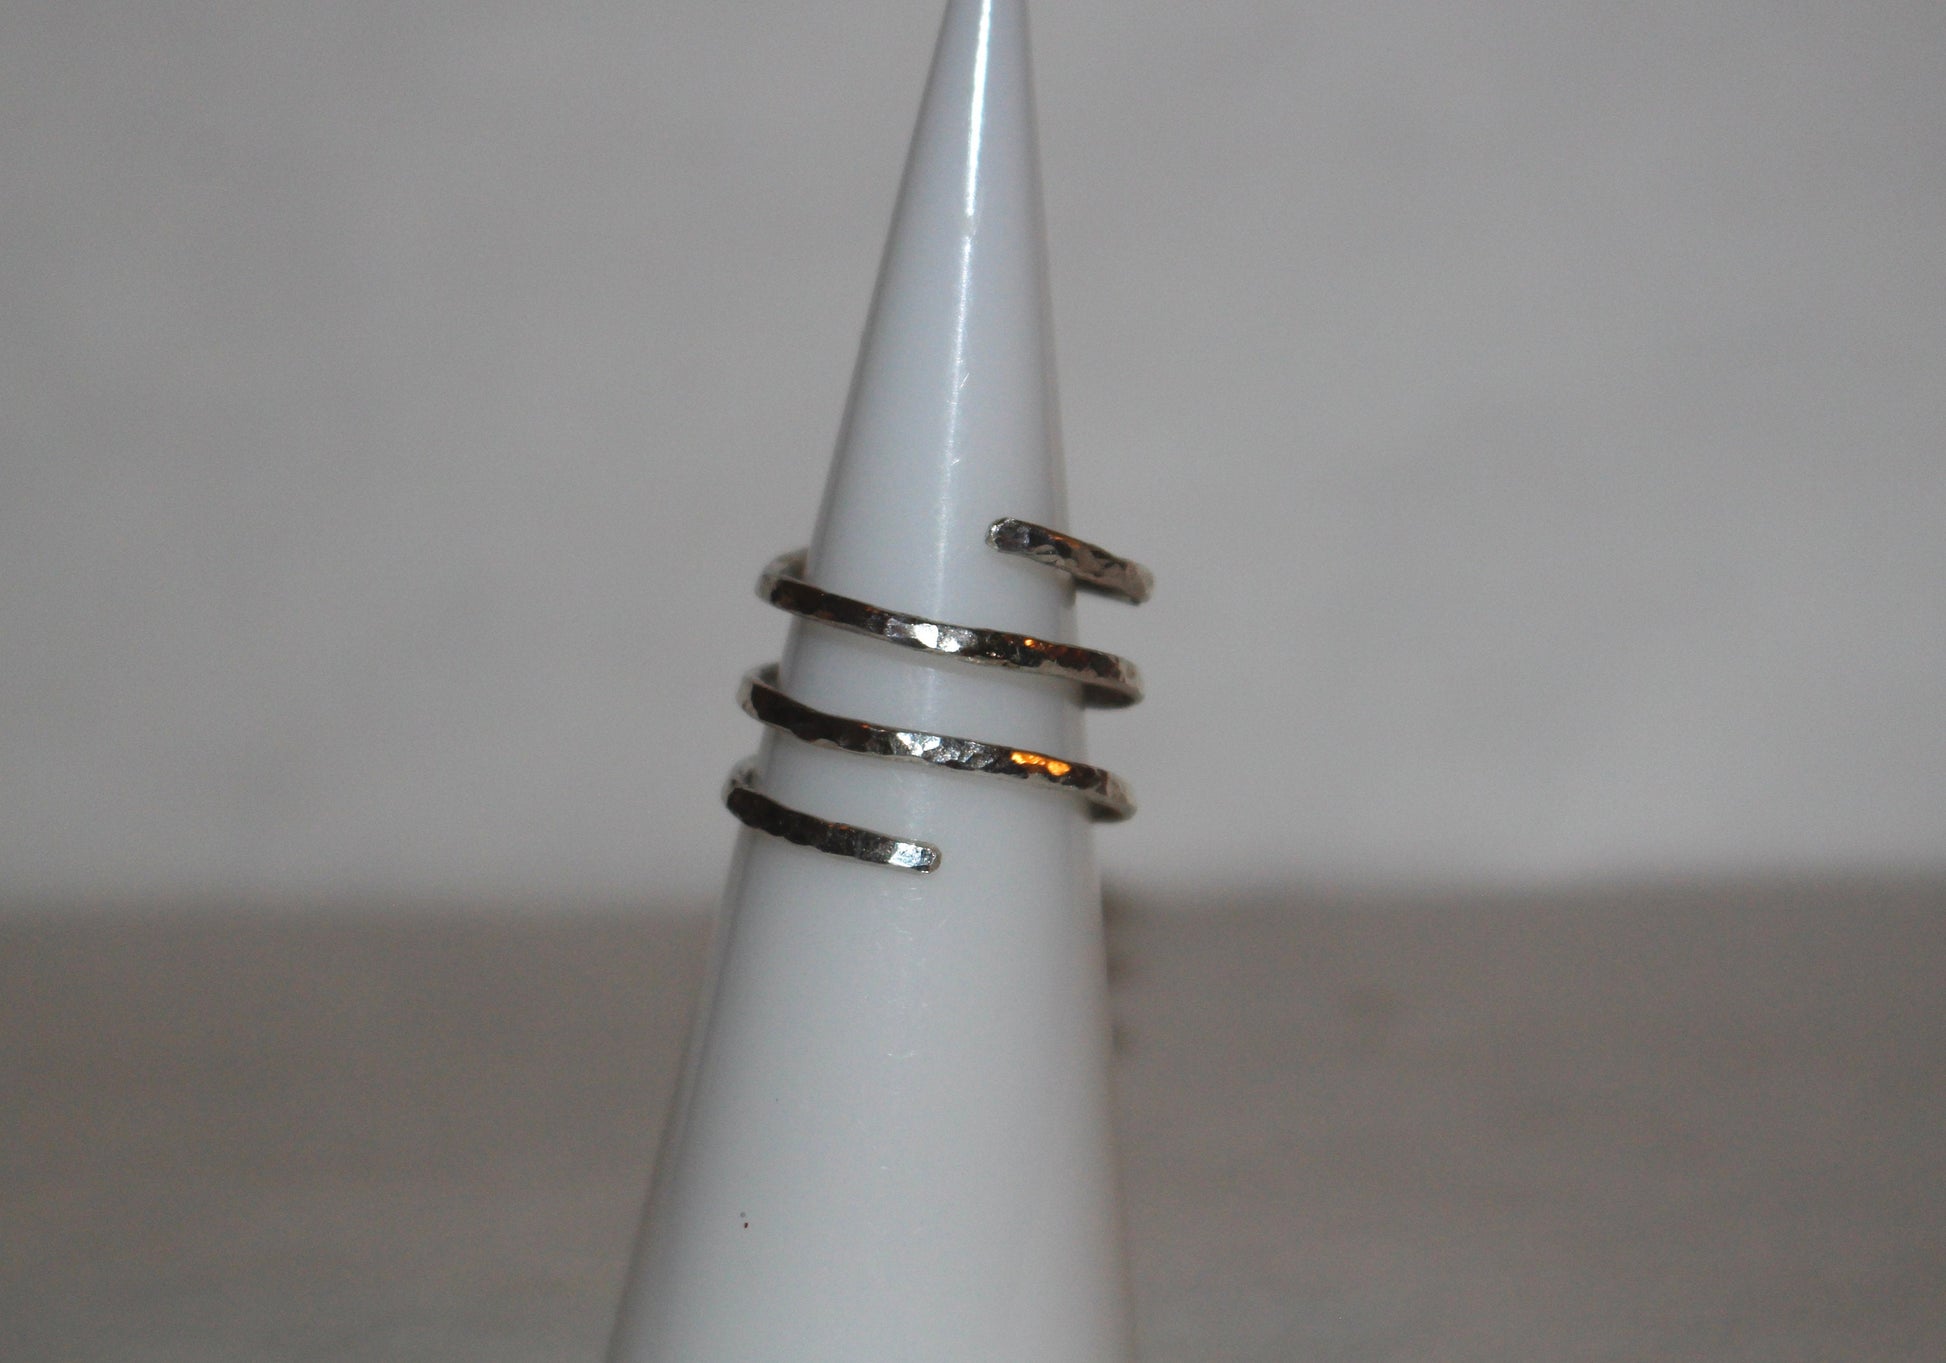 Triple Wrap Hammered Sterling Silver Ring